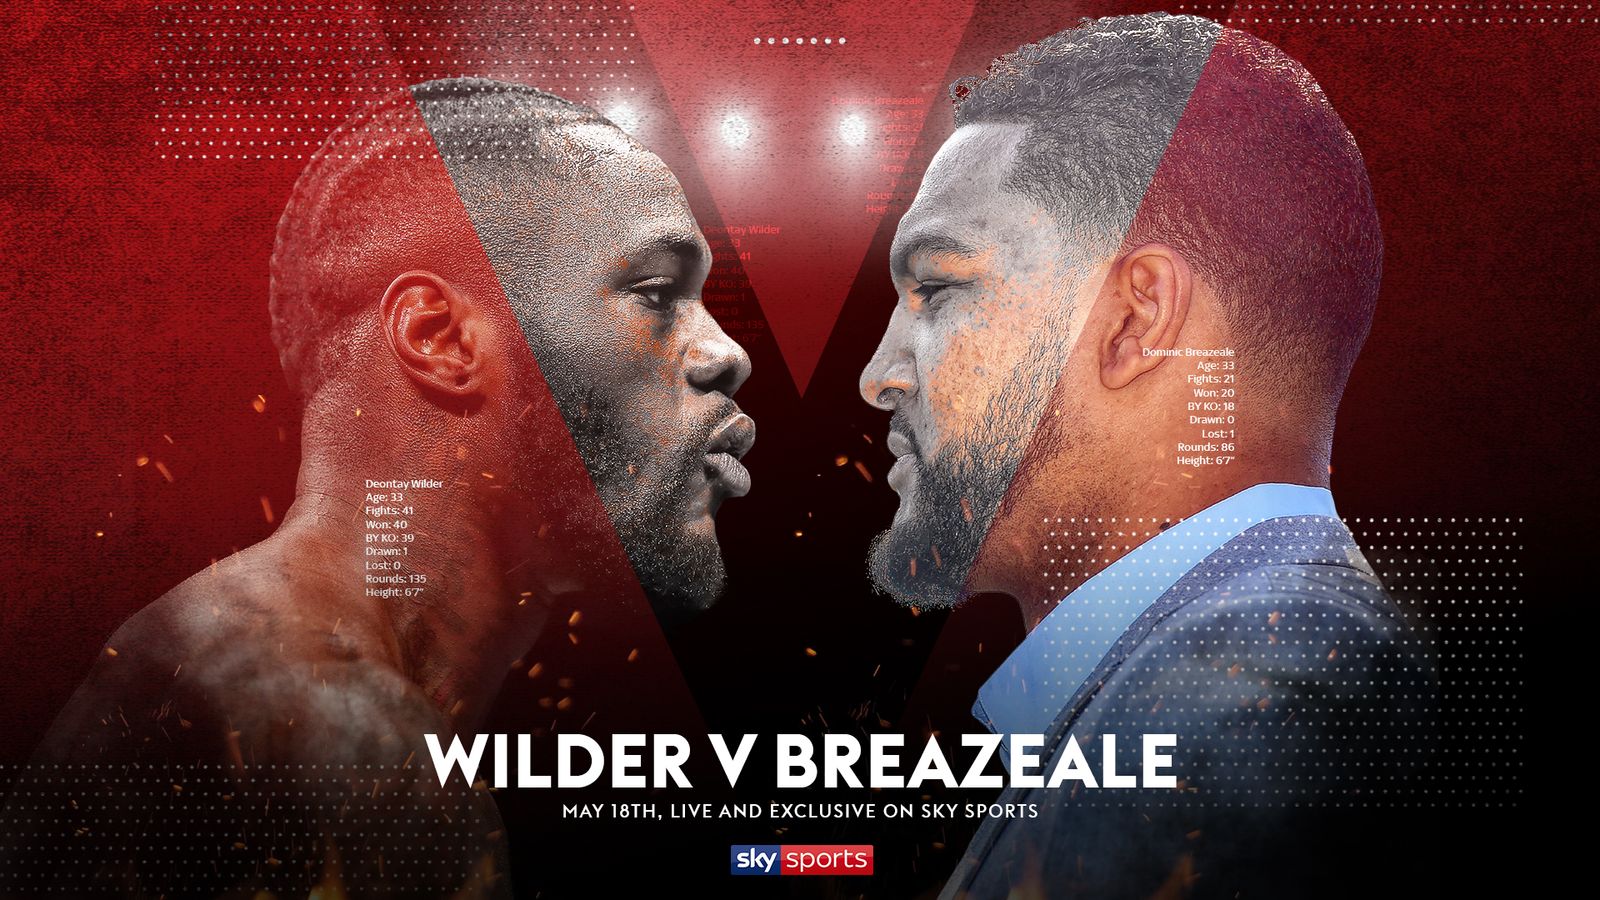 Deontay Wilder's WBC heavyweight title defence against Dominic Breazeale is live on ...